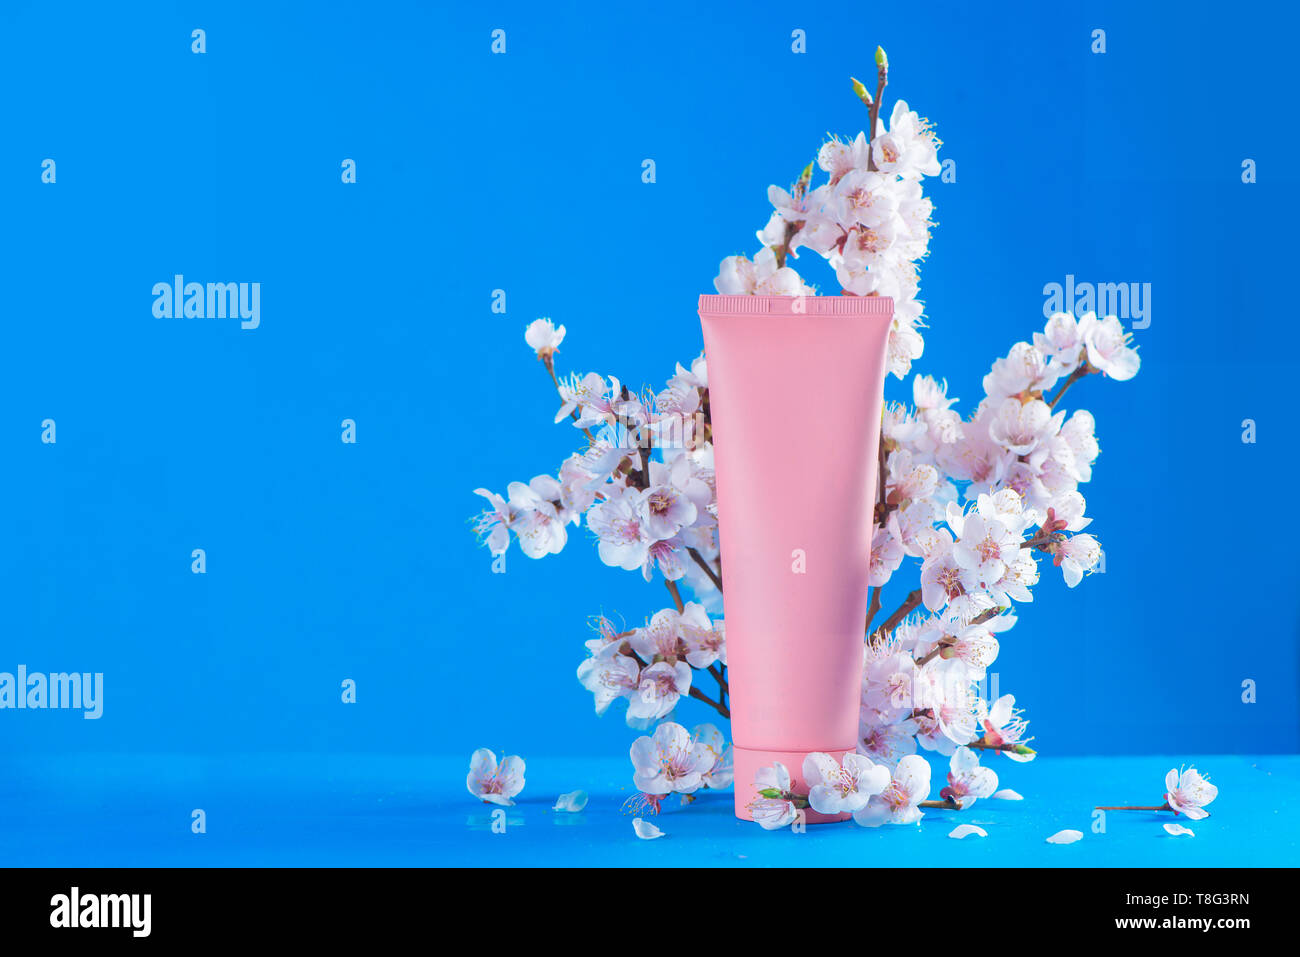 Cherry blossom cosmetics header. Pink creme tube with spring flowers on a sky blue background with copy space. Stock Photo